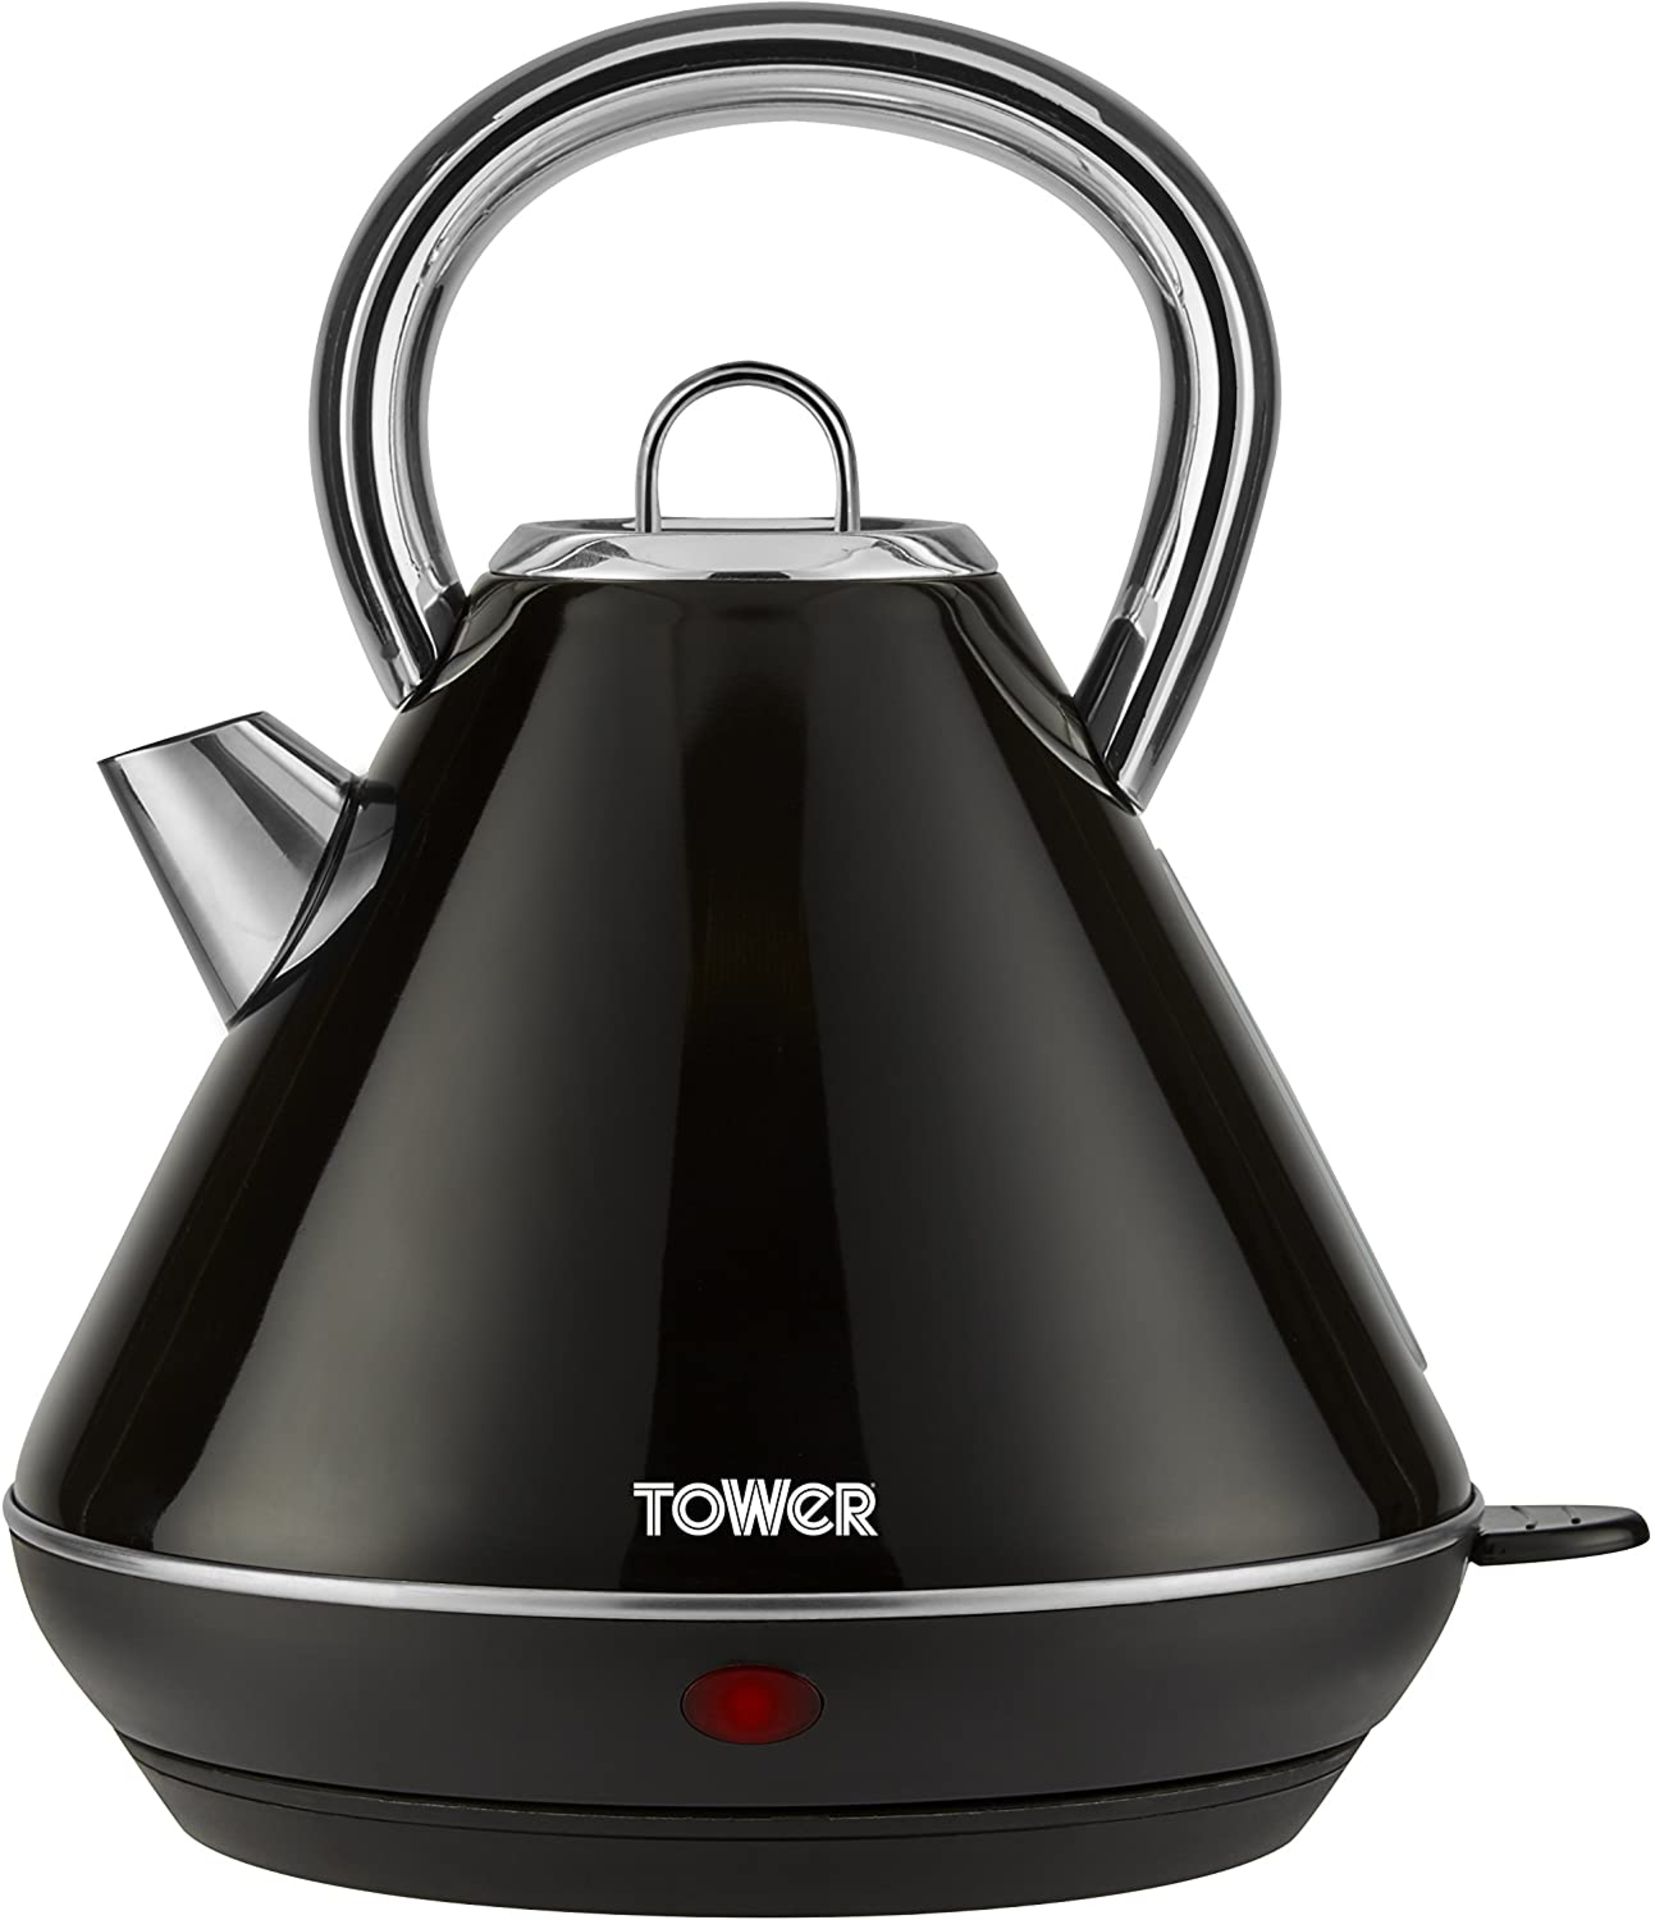 Brand New Tower 1.8L Infinity Black Rapid Boil Kettle With Swivel Base - RRP £30. - Image 2 of 2